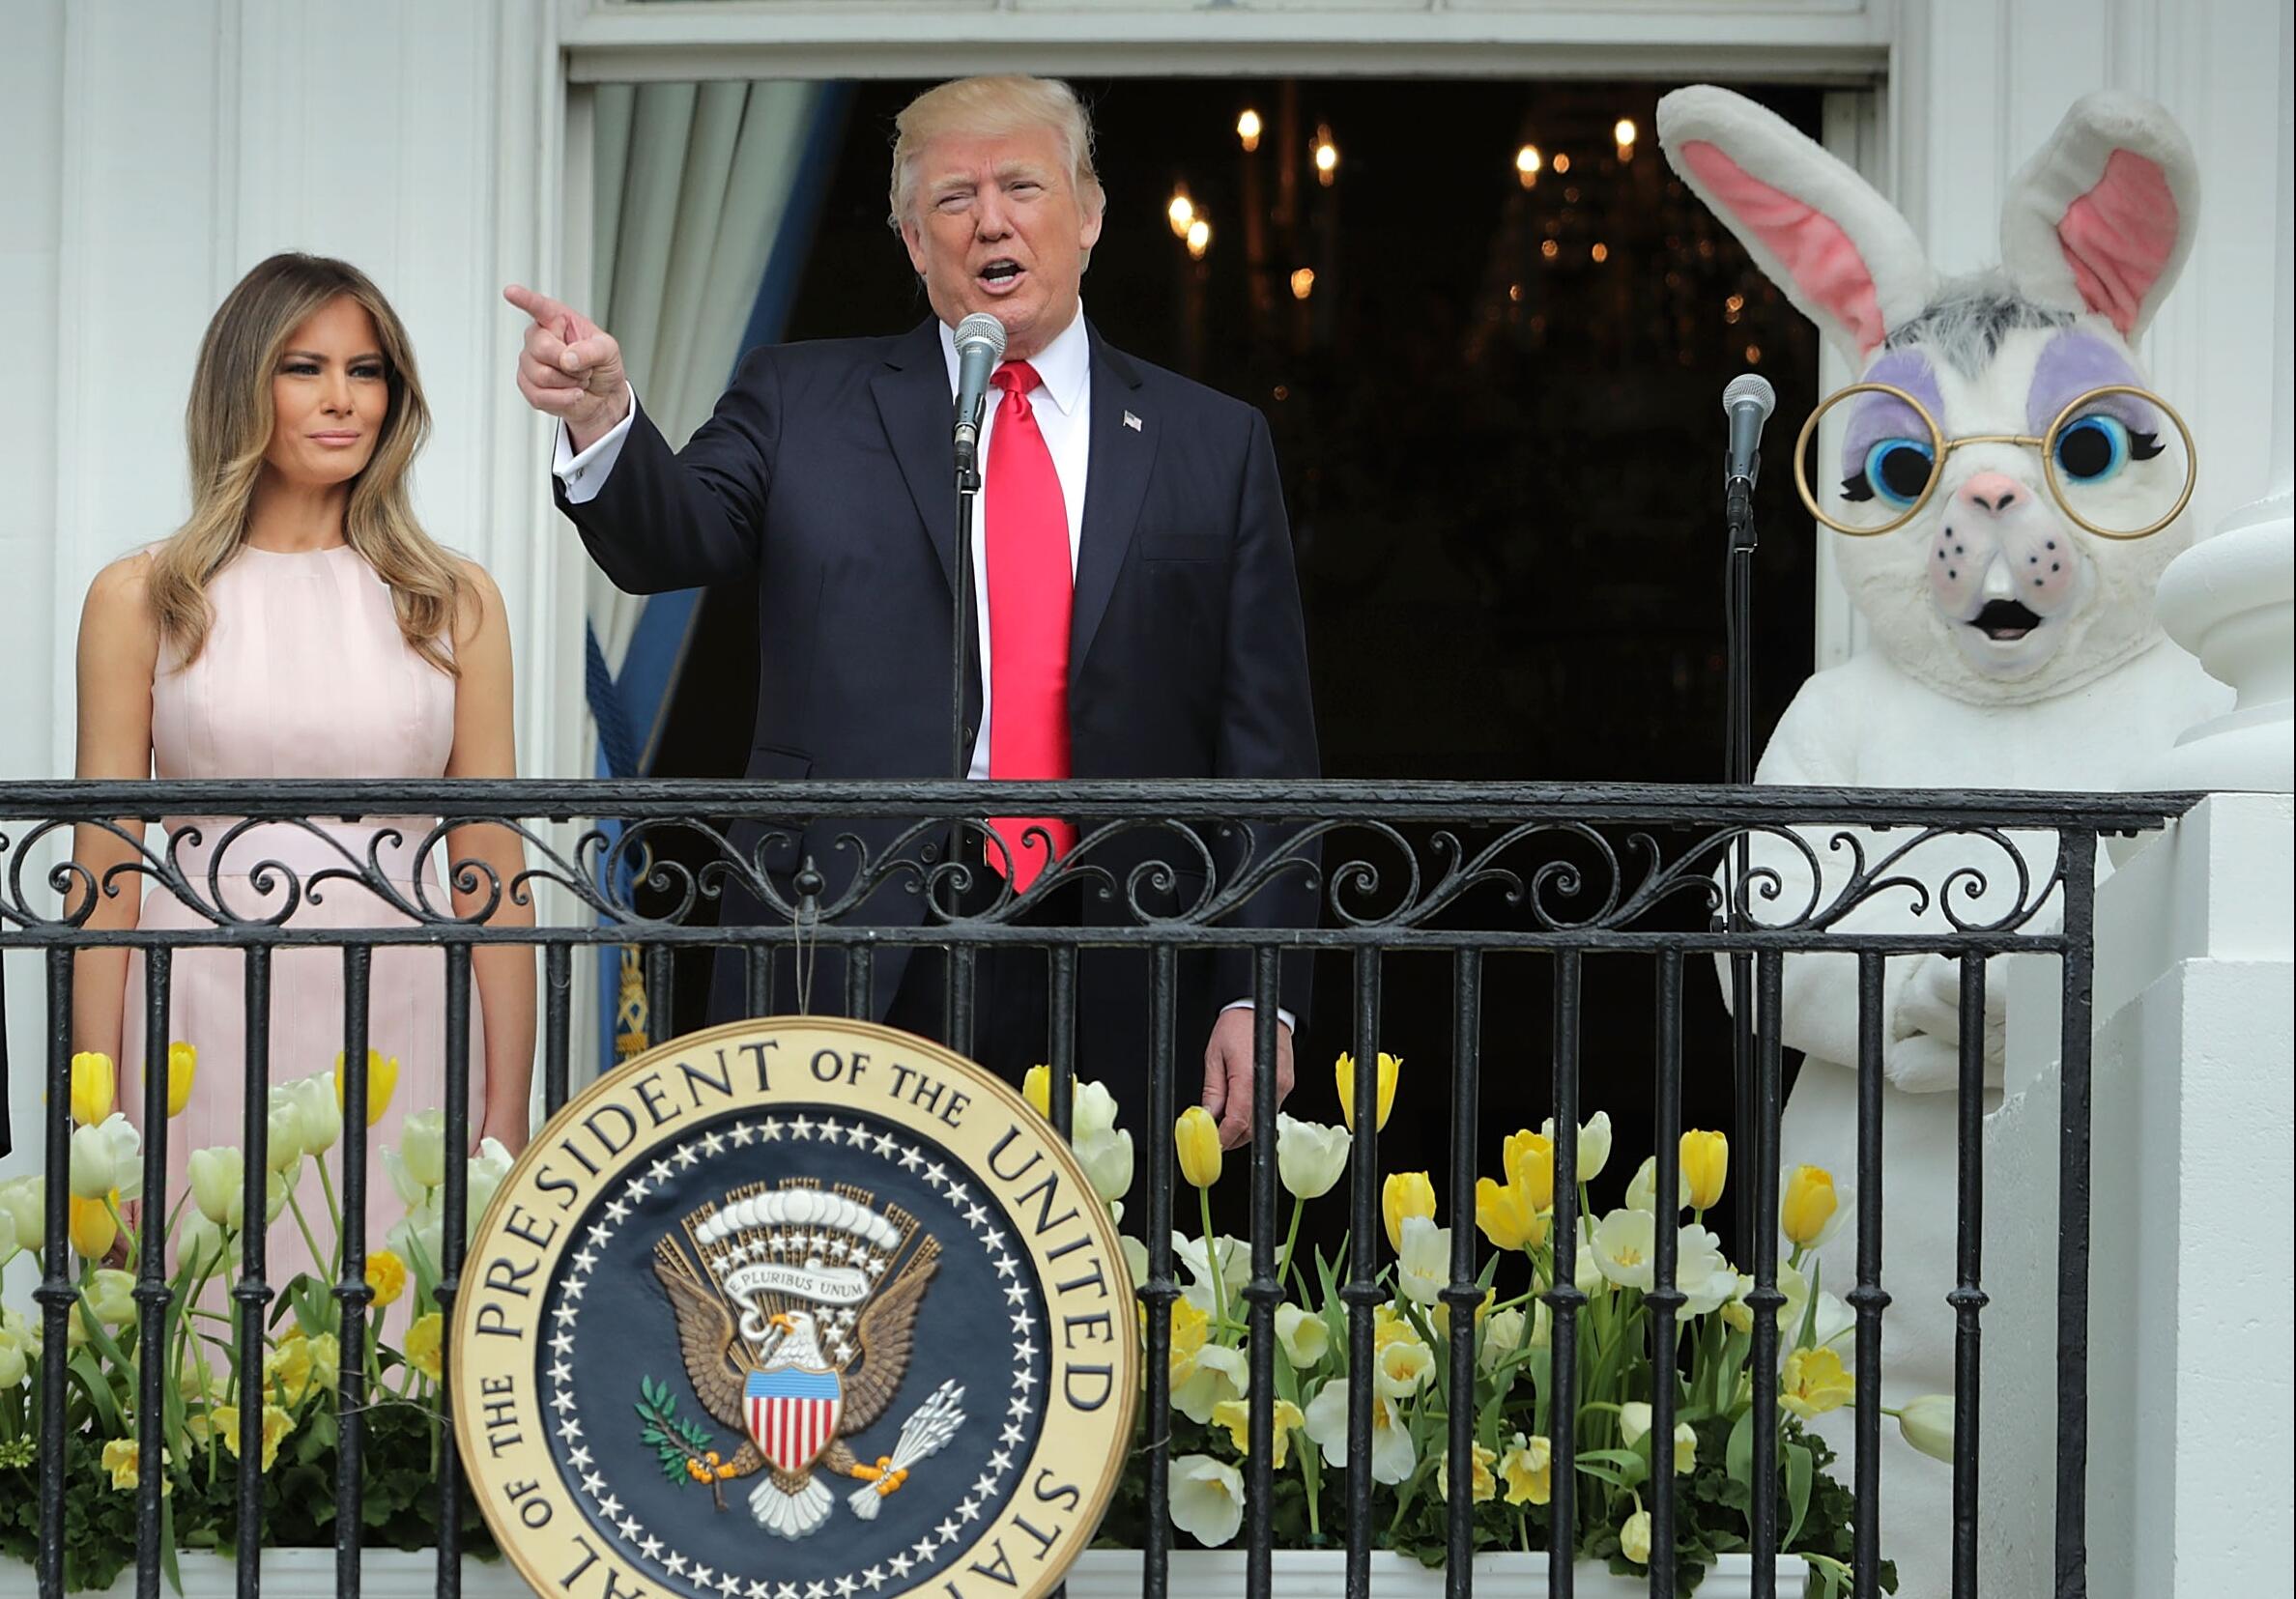 U.S. President Donald Trump and first lady Melania Trump host the 139th Easter Egg Roll on the South Lawn of the White House April 17, 2017 in Washington, DC. The White House said 21,000 people are expected to attend the annual tradition of rolling colored eggs down the White House lawn that was started by President Rutherford B. Hayes in 1878. 